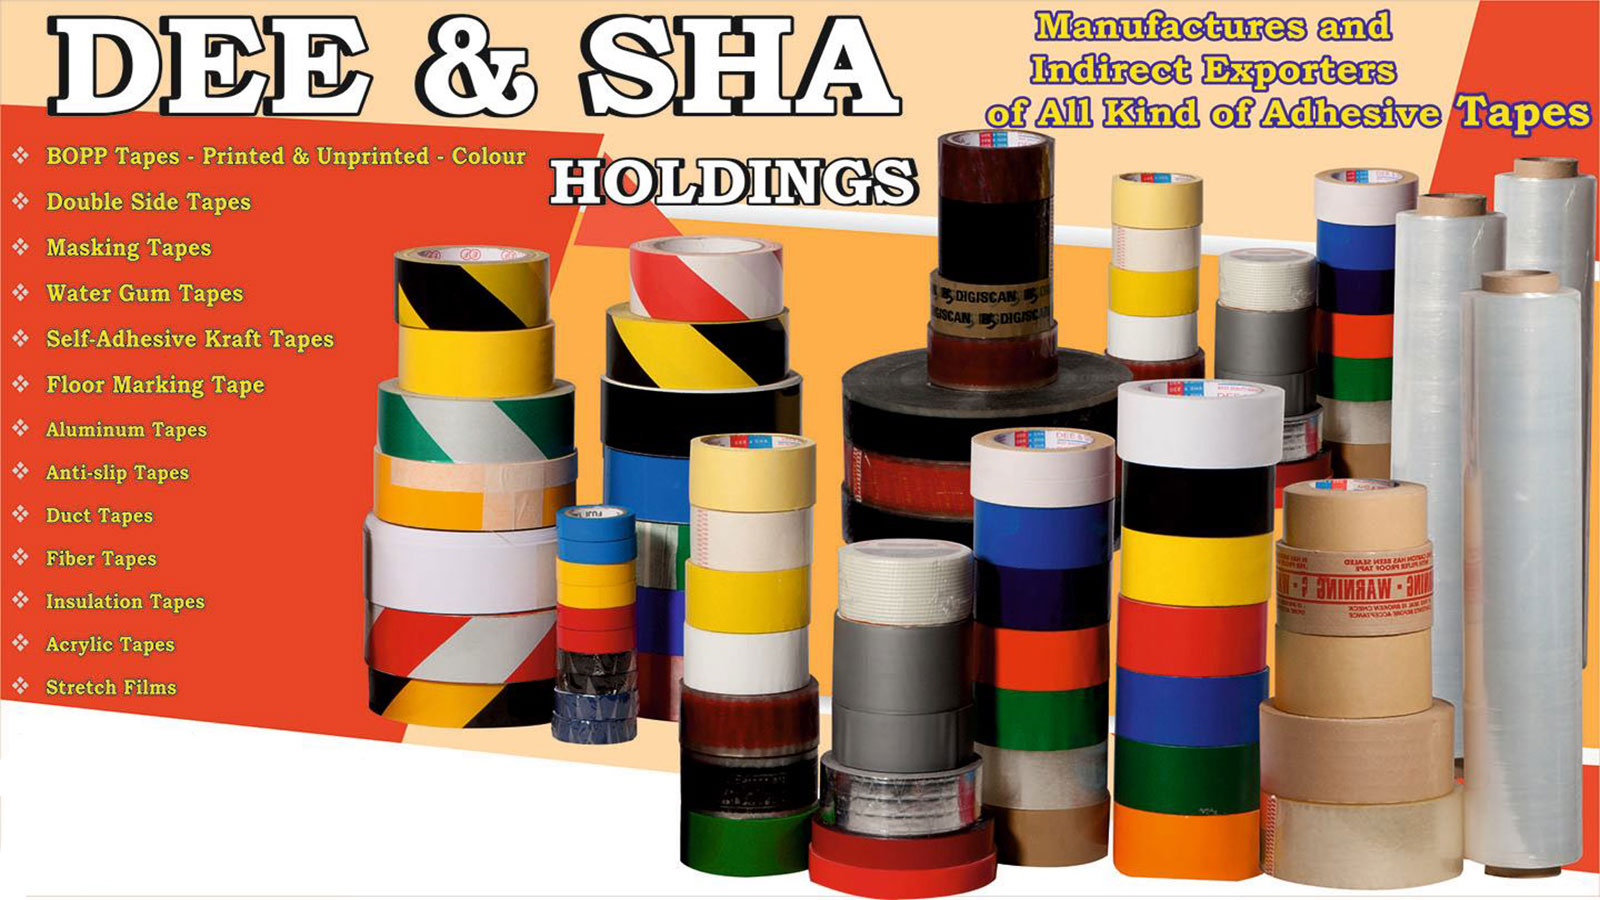 DEE AND SHA HOLDINGS